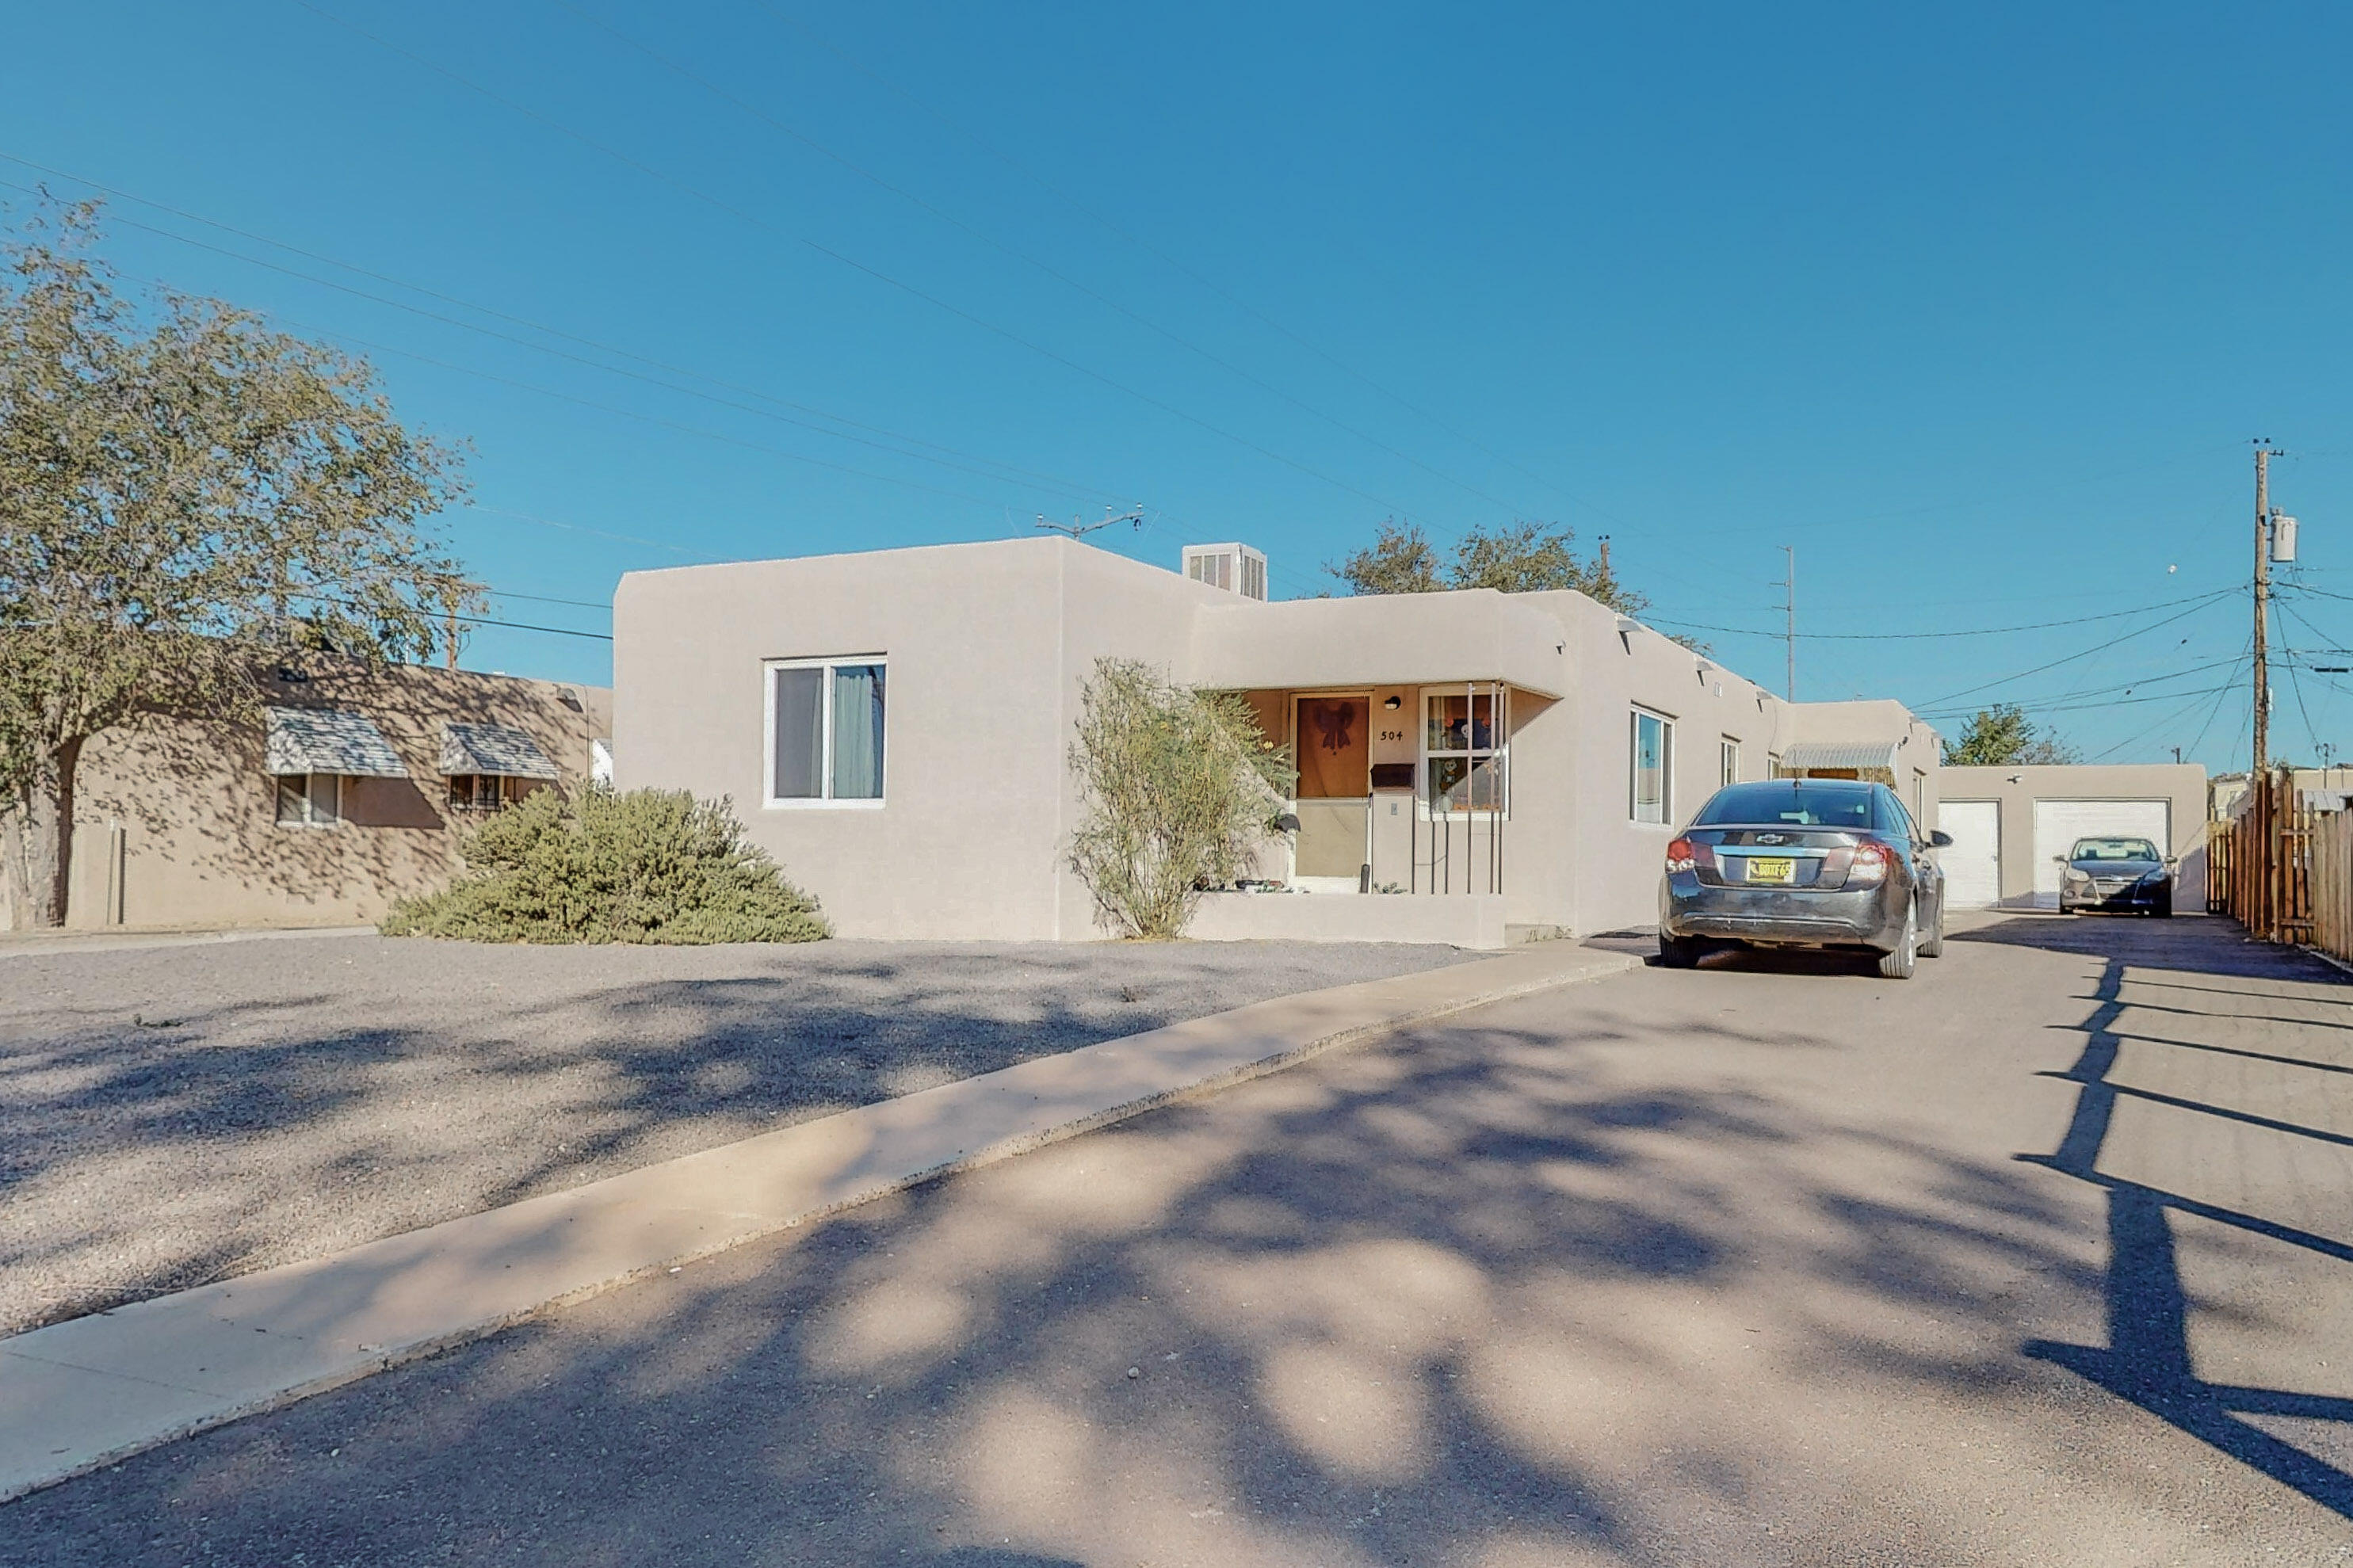 504 Cagua Drive SE, Albuquerque, New Mexico 87108, 2 Bedrooms Bedrooms, ,1 BathroomBathrooms,Residential Income,For Sale,504 Cagua Drive SE,1061817